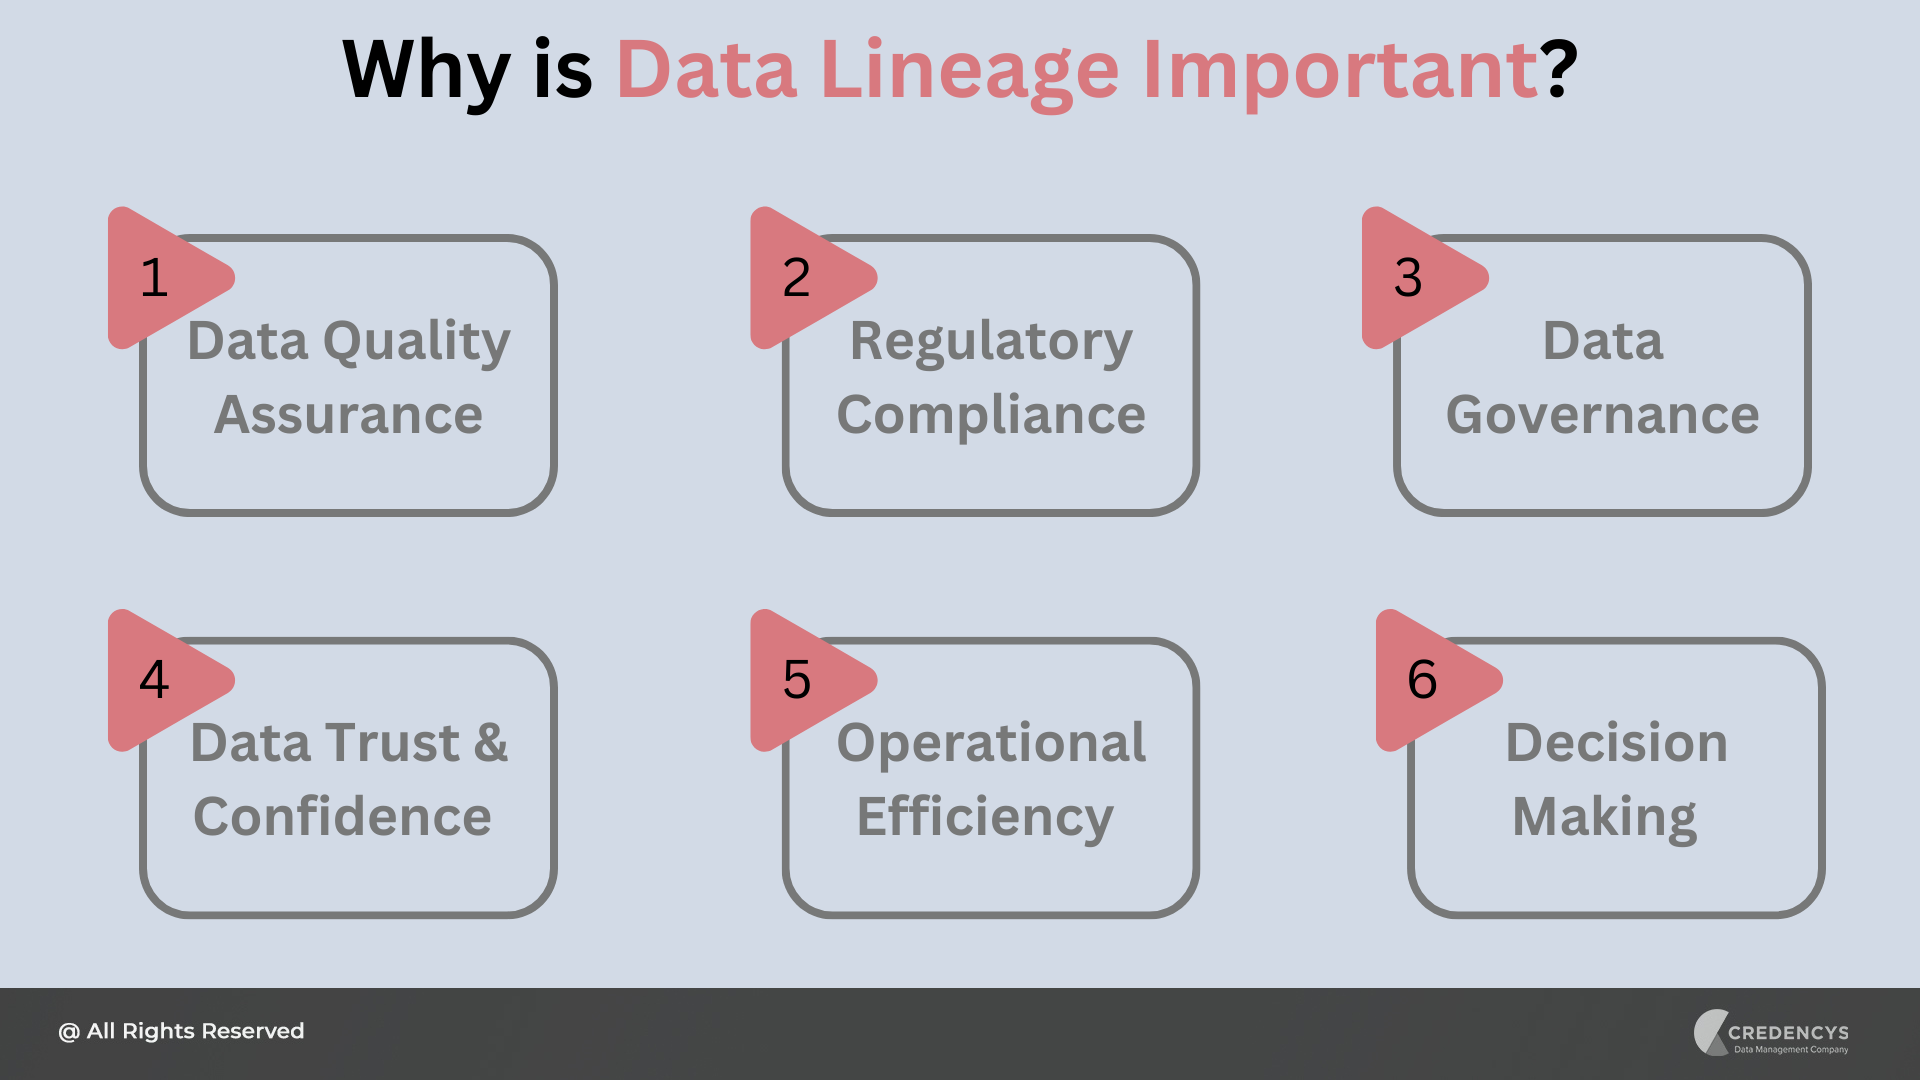 Why is Data Lineage Important